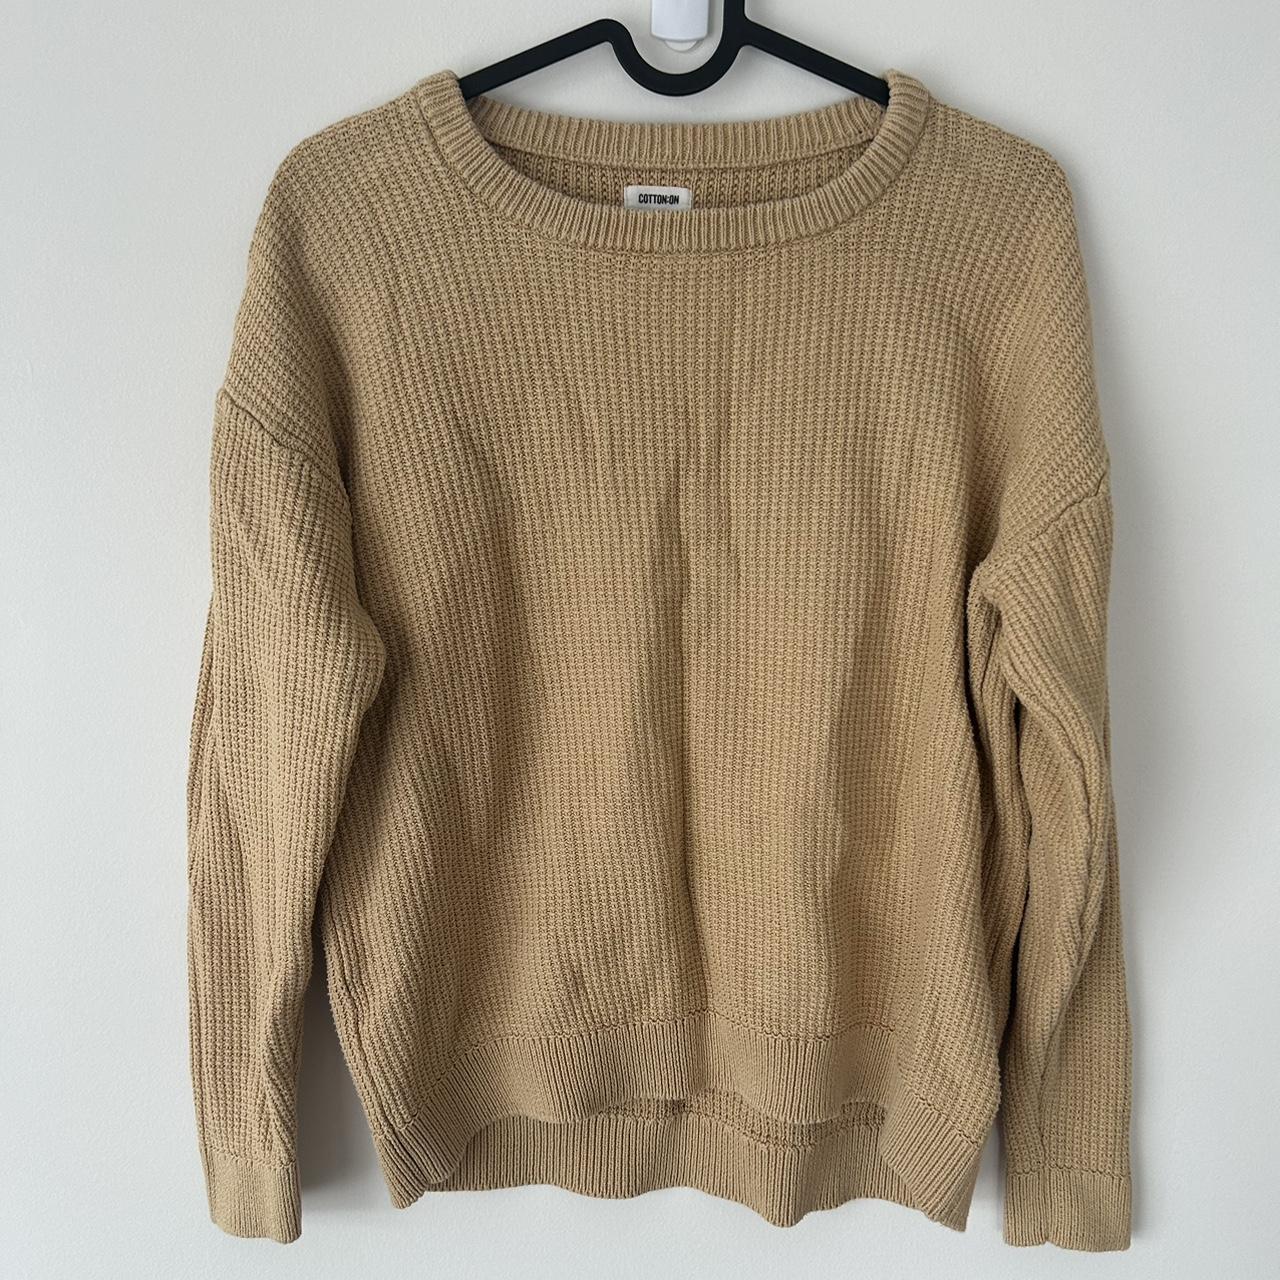 Cotton on waffle style knitted women’s jumper. Size... - Depop